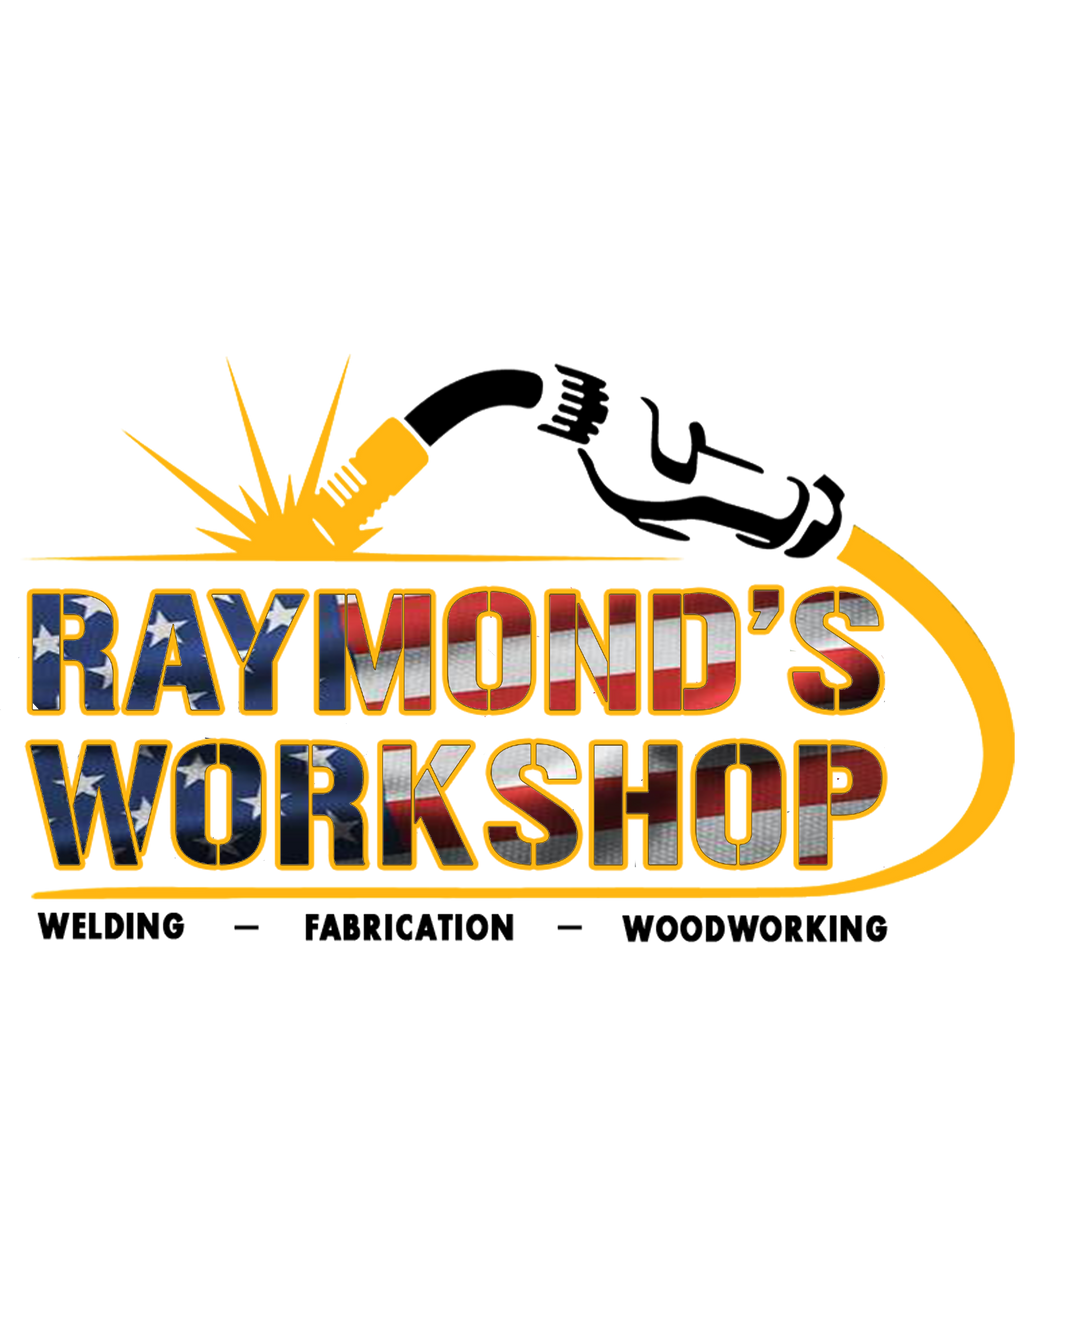 Appointment - Raymond's Workshop